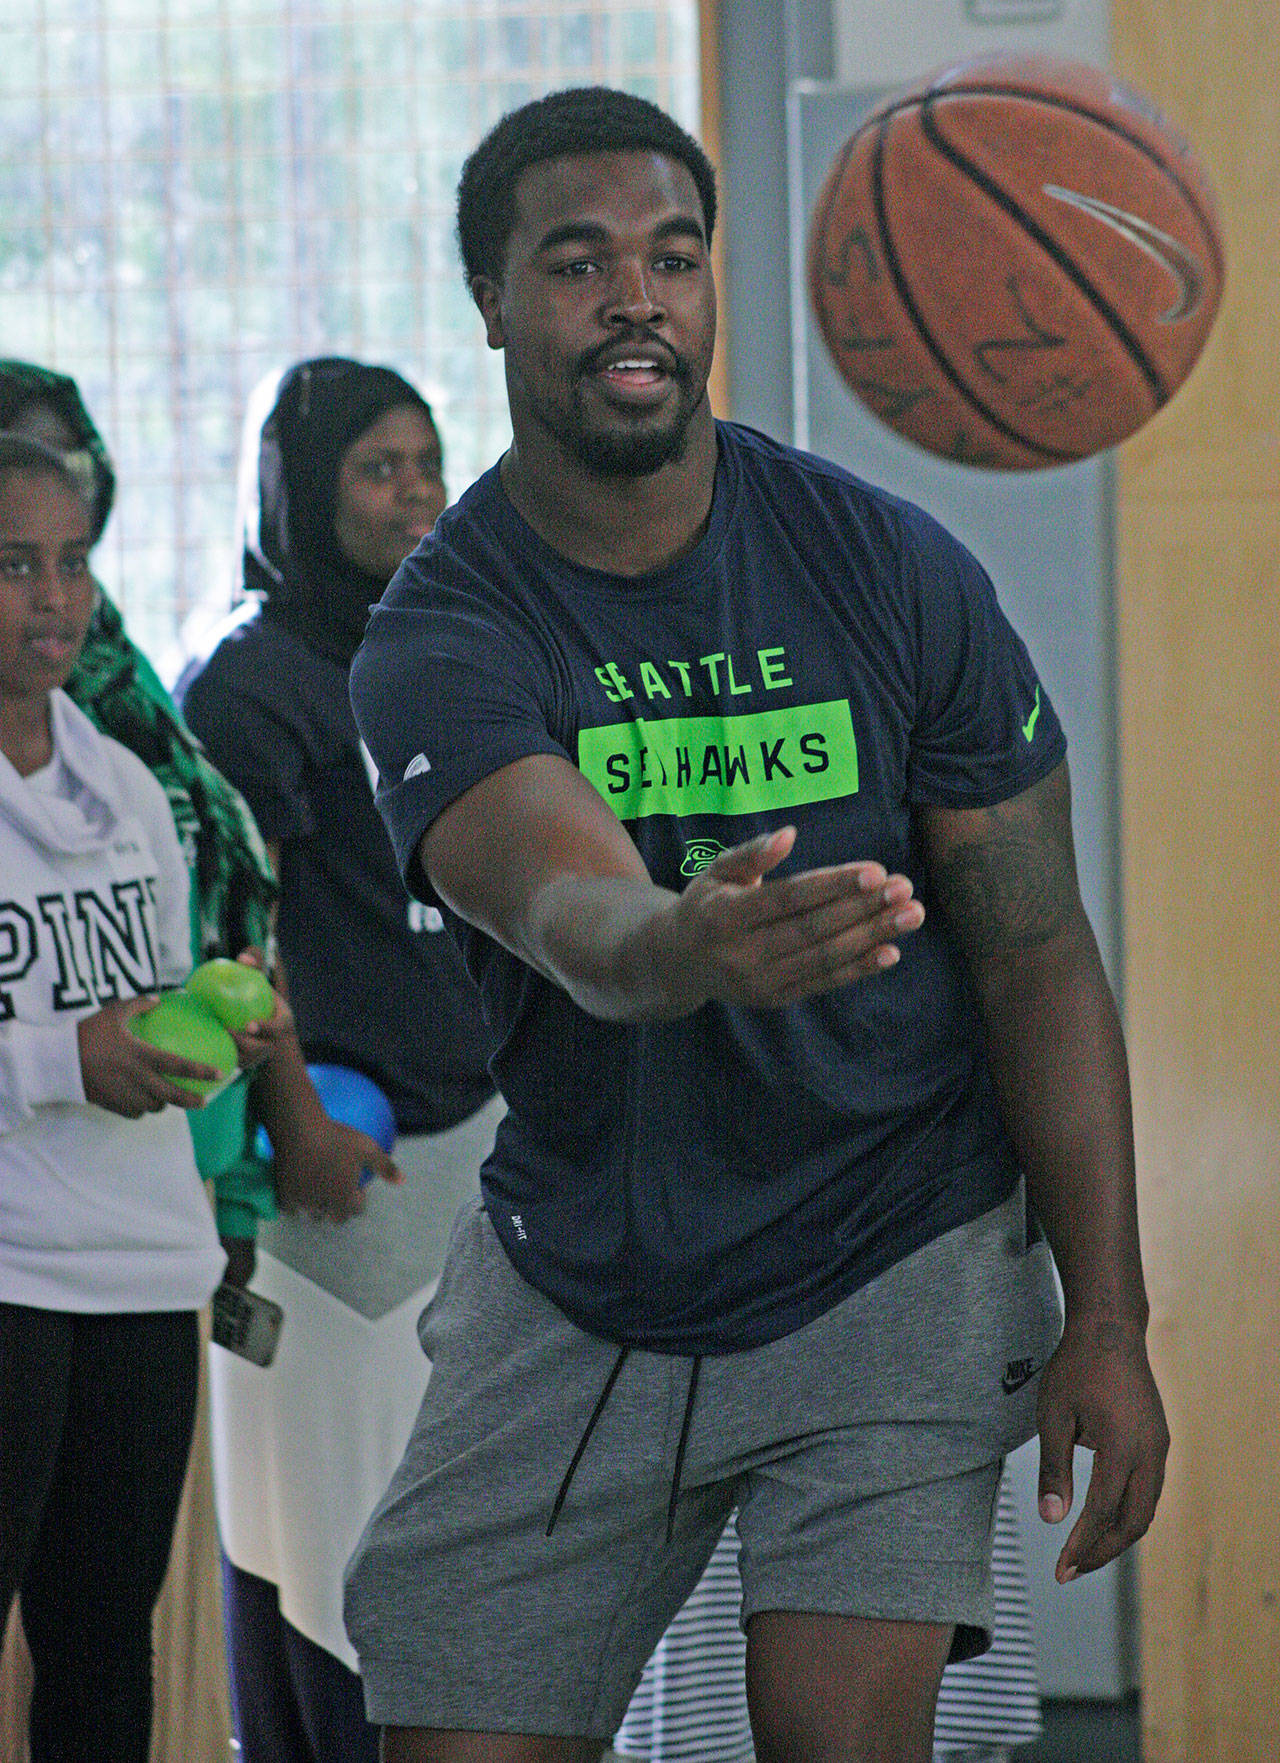 The Seahawks’ Tyrone Swoopes, a 6-foot-4 tight end, plays basketball with boys and girls during a career fair at the Birch Creek Youth Center. MARK KLAAS, Kent Reporter